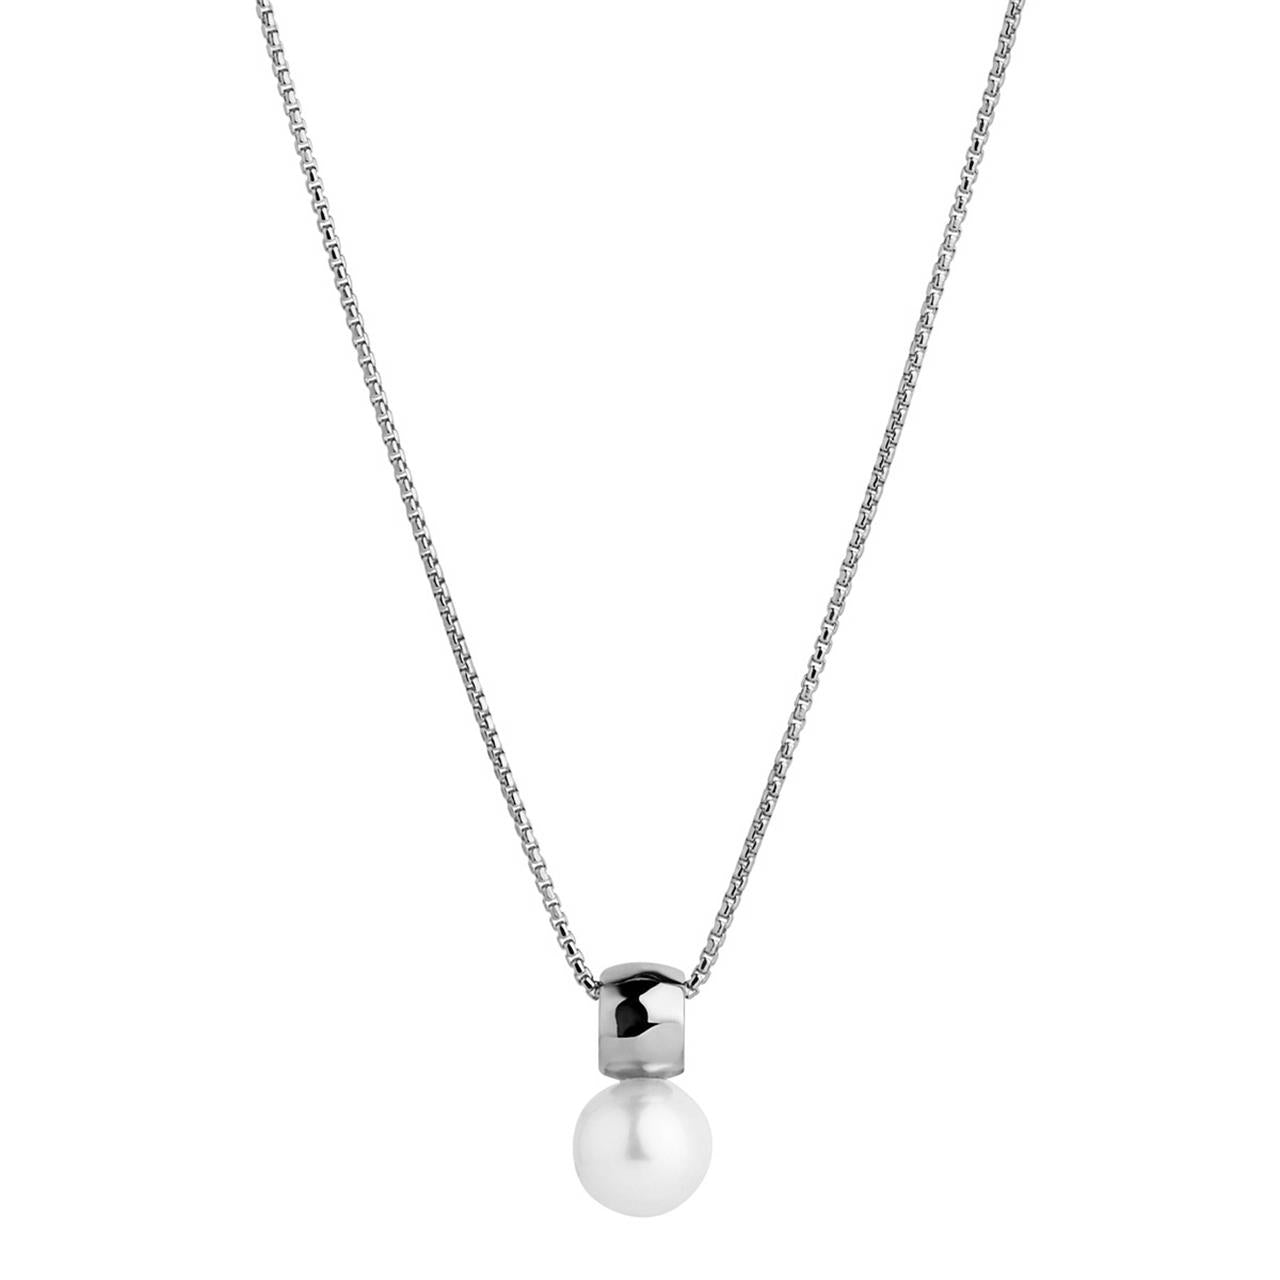 Idyll Silver Pearl Necklace 45cm